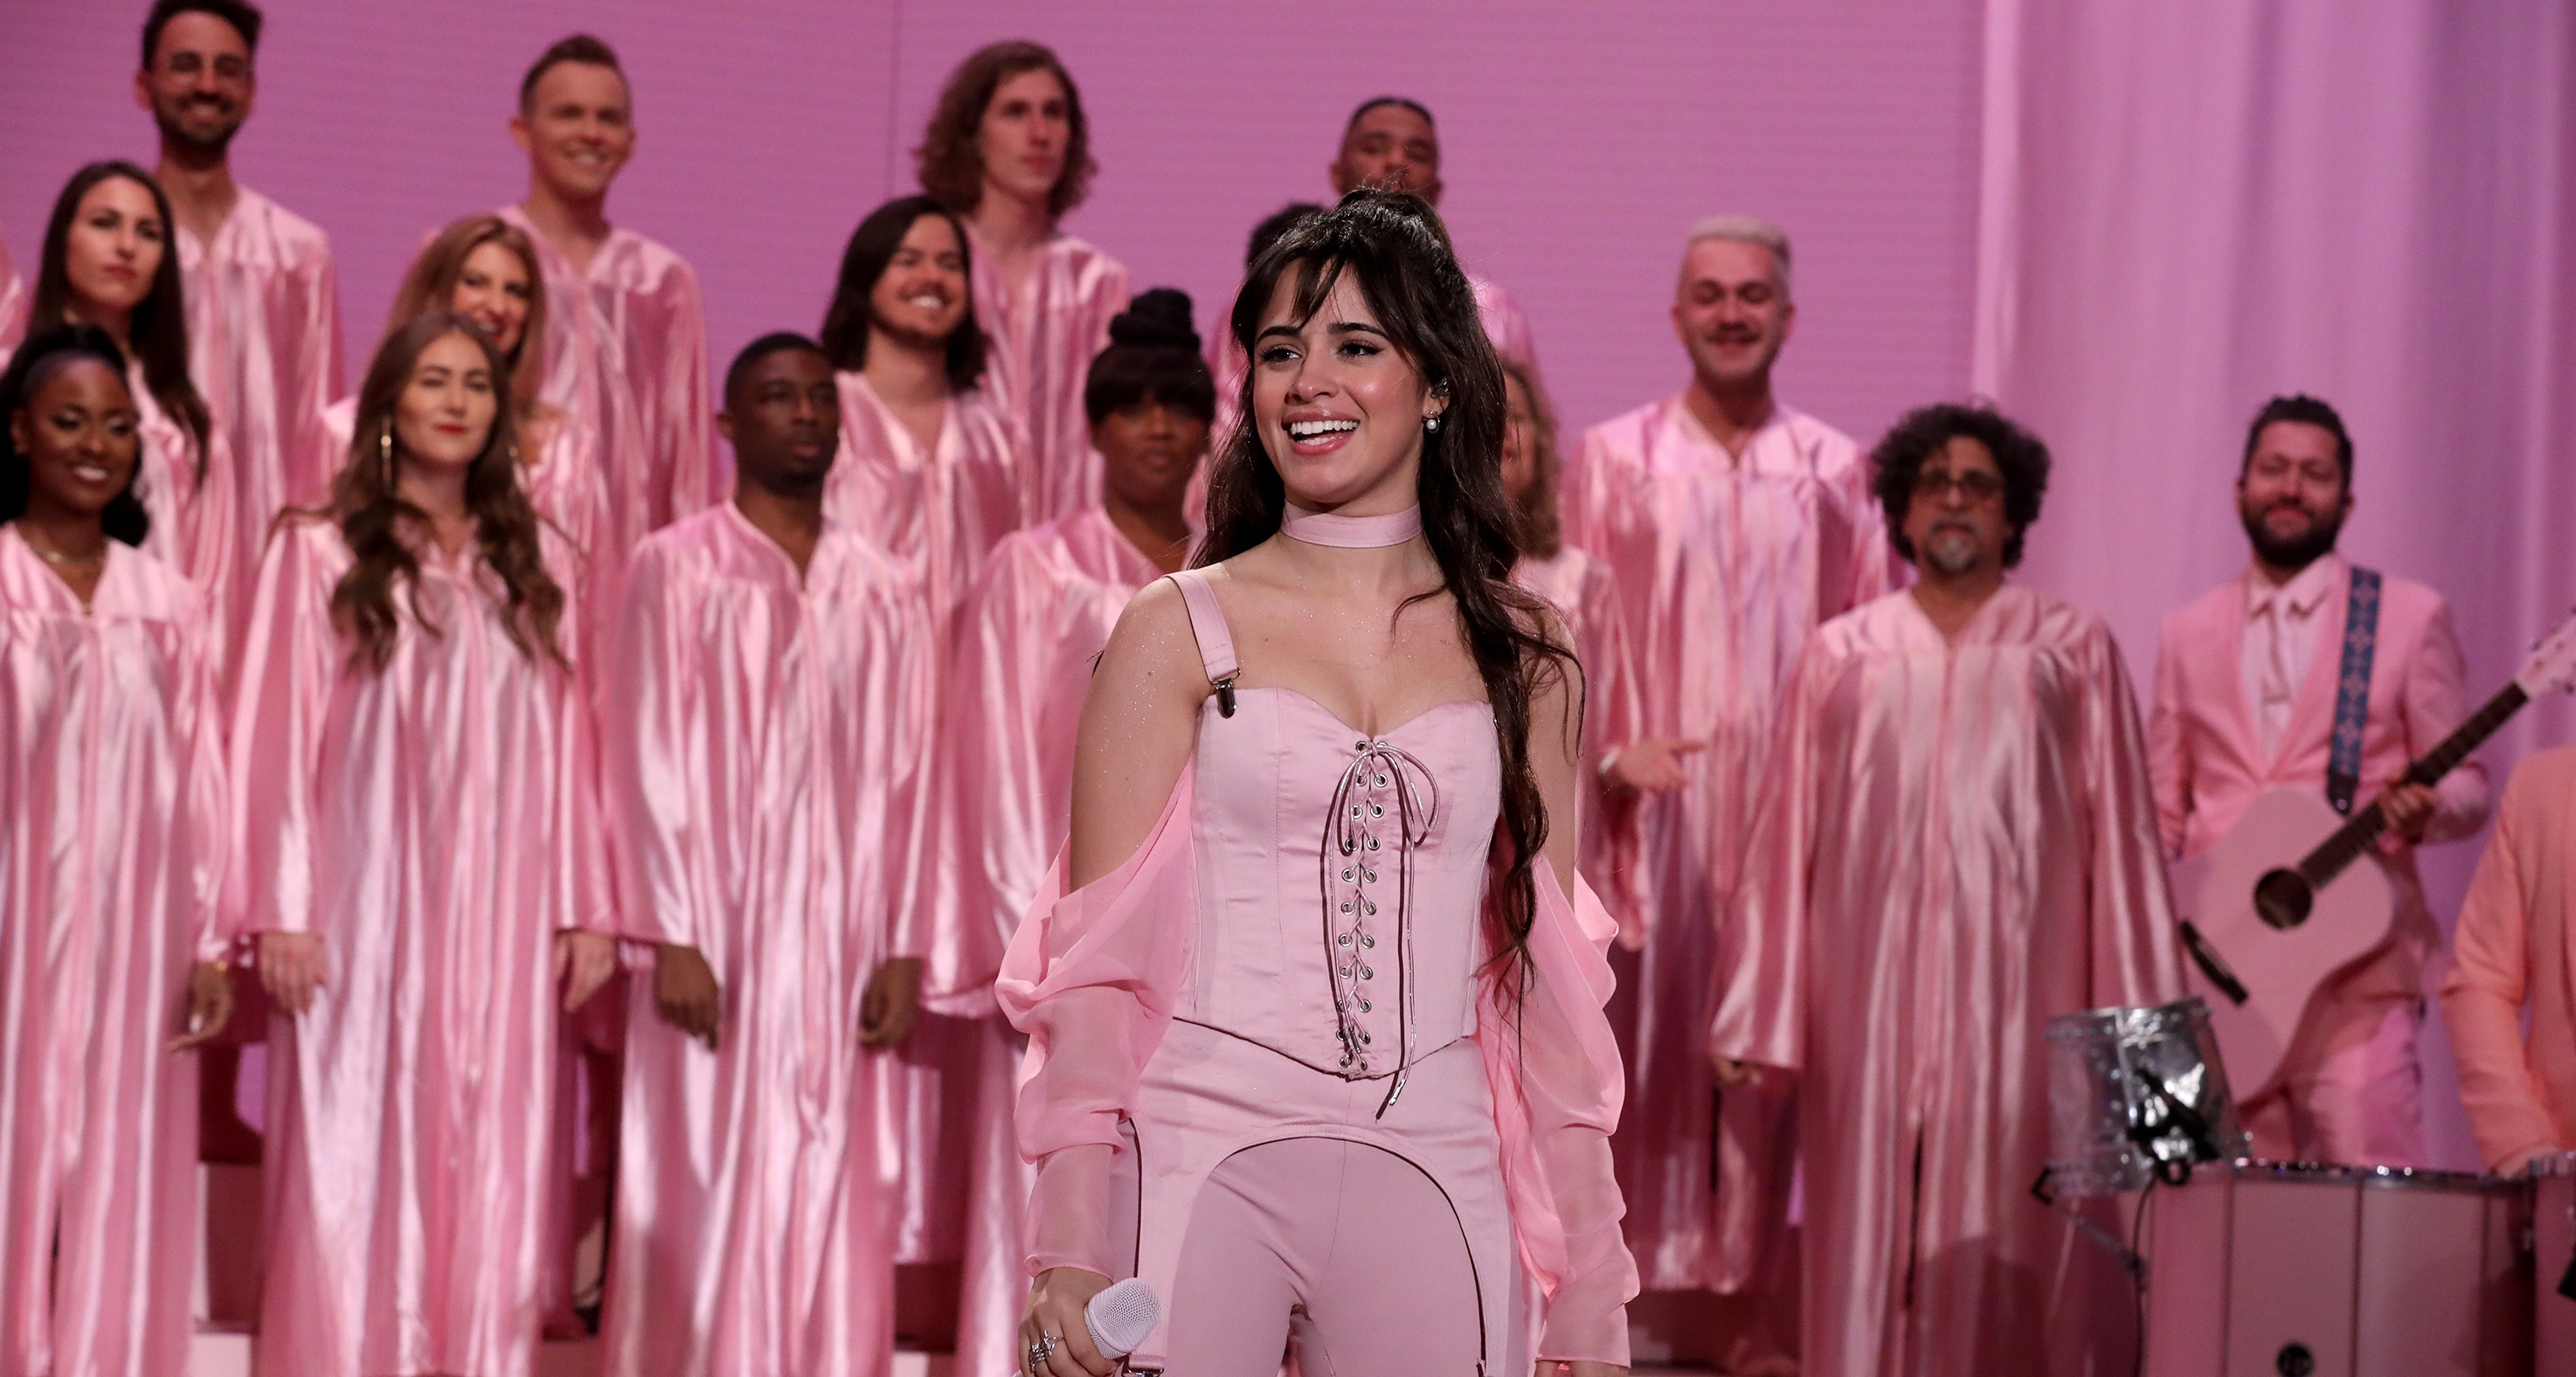 Watch: Camila Cabello’s Performance of ‘Living Proof’ From The Ellen DeGeneres Show